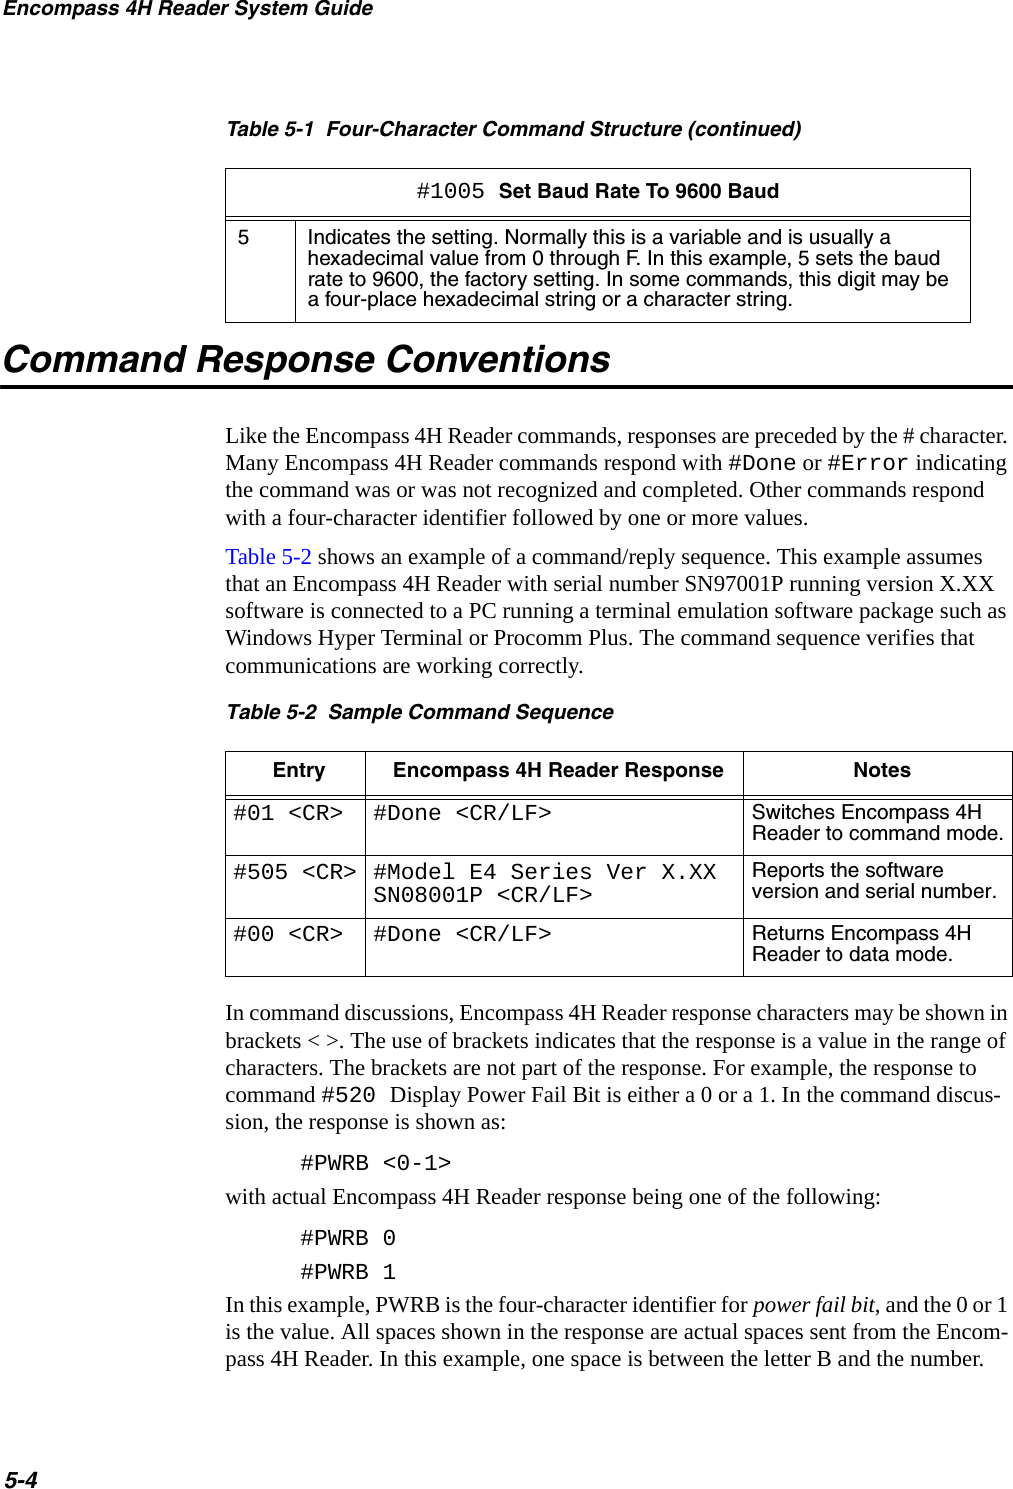 Encompass 4H Reader System Guide5-4Command Response ConventionsLike the Encompass 4H Reader commands, responses are preceded by the # character. Many Encompass 4H Reader commands respond with #Done or #Error indicating the command was or was not recognized and completed. Other commands respond with a four-character identifier followed by one or more values.Table 5-2 shows an example of a command/reply sequence. This example assumes that an Encompass 4H Reader with serial number SN97001P running version X.XX software is connected to a PC running a terminal emulation software package such as Windows Hyper Terminal or Procomm Plus. The command sequence verifies that communications are working correctly.Table 5-2  Sample Command SequenceEntry Encompass 4H Reader Response Notes#01 &lt;CR&gt; #Done &lt;CR/LF&gt; Switches Encompass 4H Reader to command mode.#505 &lt;CR&gt; #Model E4 Series Ver X.XX SN08001P &lt;CR/LF&gt;Reports the software version and serial number.#00 &lt;CR&gt; #Done &lt;CR/LF&gt; Returns Encompass 4H Reader to data mode.In command discussions, Encompass 4H Reader response characters may be shown in brackets &lt; &gt;. The use of brackets indicates that the response is a value in the range of characters. The brackets are not part of the response. For example, the response to command #520 Display Power Fail Bit is either a 0 or a 1. In the command discus-sion, the response is shown as:#PWRB &lt;0-1&gt;with actual Encompass 4H Reader response being one of the following:#PWRB 0#PWRB 1In this example, PWRB is the four-character identifier for power fail bit, and the 0 or 1 is the value. All spaces shown in the response are actual spaces sent from the Encom-pass 4H Reader. In this example, one space is between the letter B and the number. 5Indicates the setting. Normally this is a variable and is usually a hexadecimal value from 0 through F. In this example, 5 sets the baud rate to 9600, the factory setting. In some commands, this digit may be a four-place hexadecimal string or a character string.Table 5-1  Four-Character Command Structure (continued)#1005 Set Baud Rate To 9600 Baud